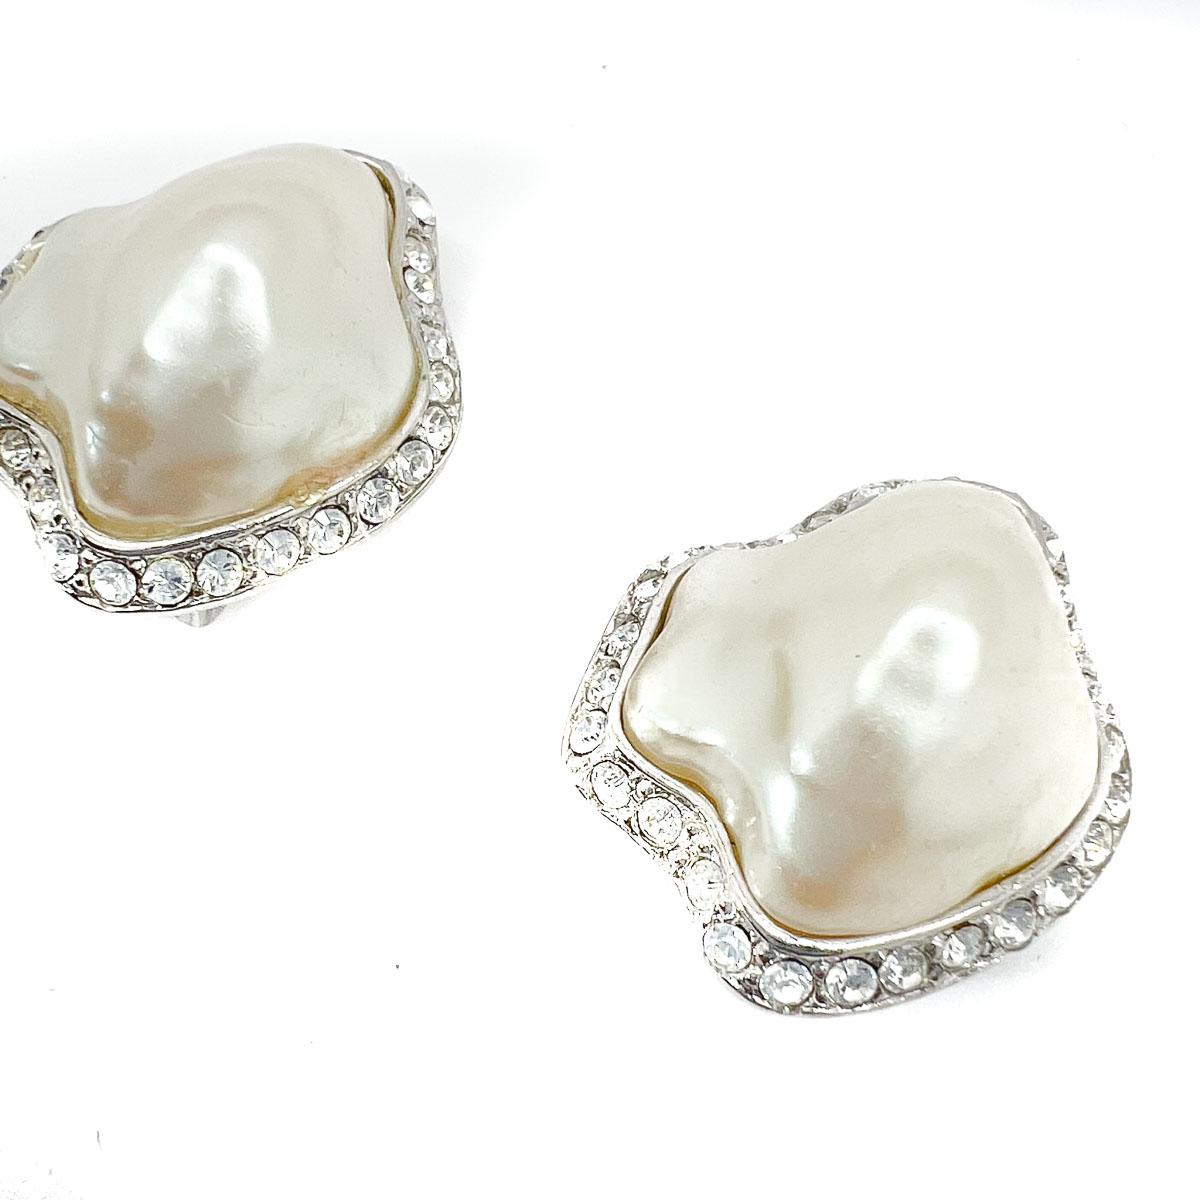 A pair of Vintage KJL Mabé Pearl Earrings. A perfect find that evoke timeless style and opulence.
KJL Kenneth Jay Lane. A master of costume jewellery and fabulous fakery since the 1960s Kenneth Jay Lane's talents are globally renowned, his pieces